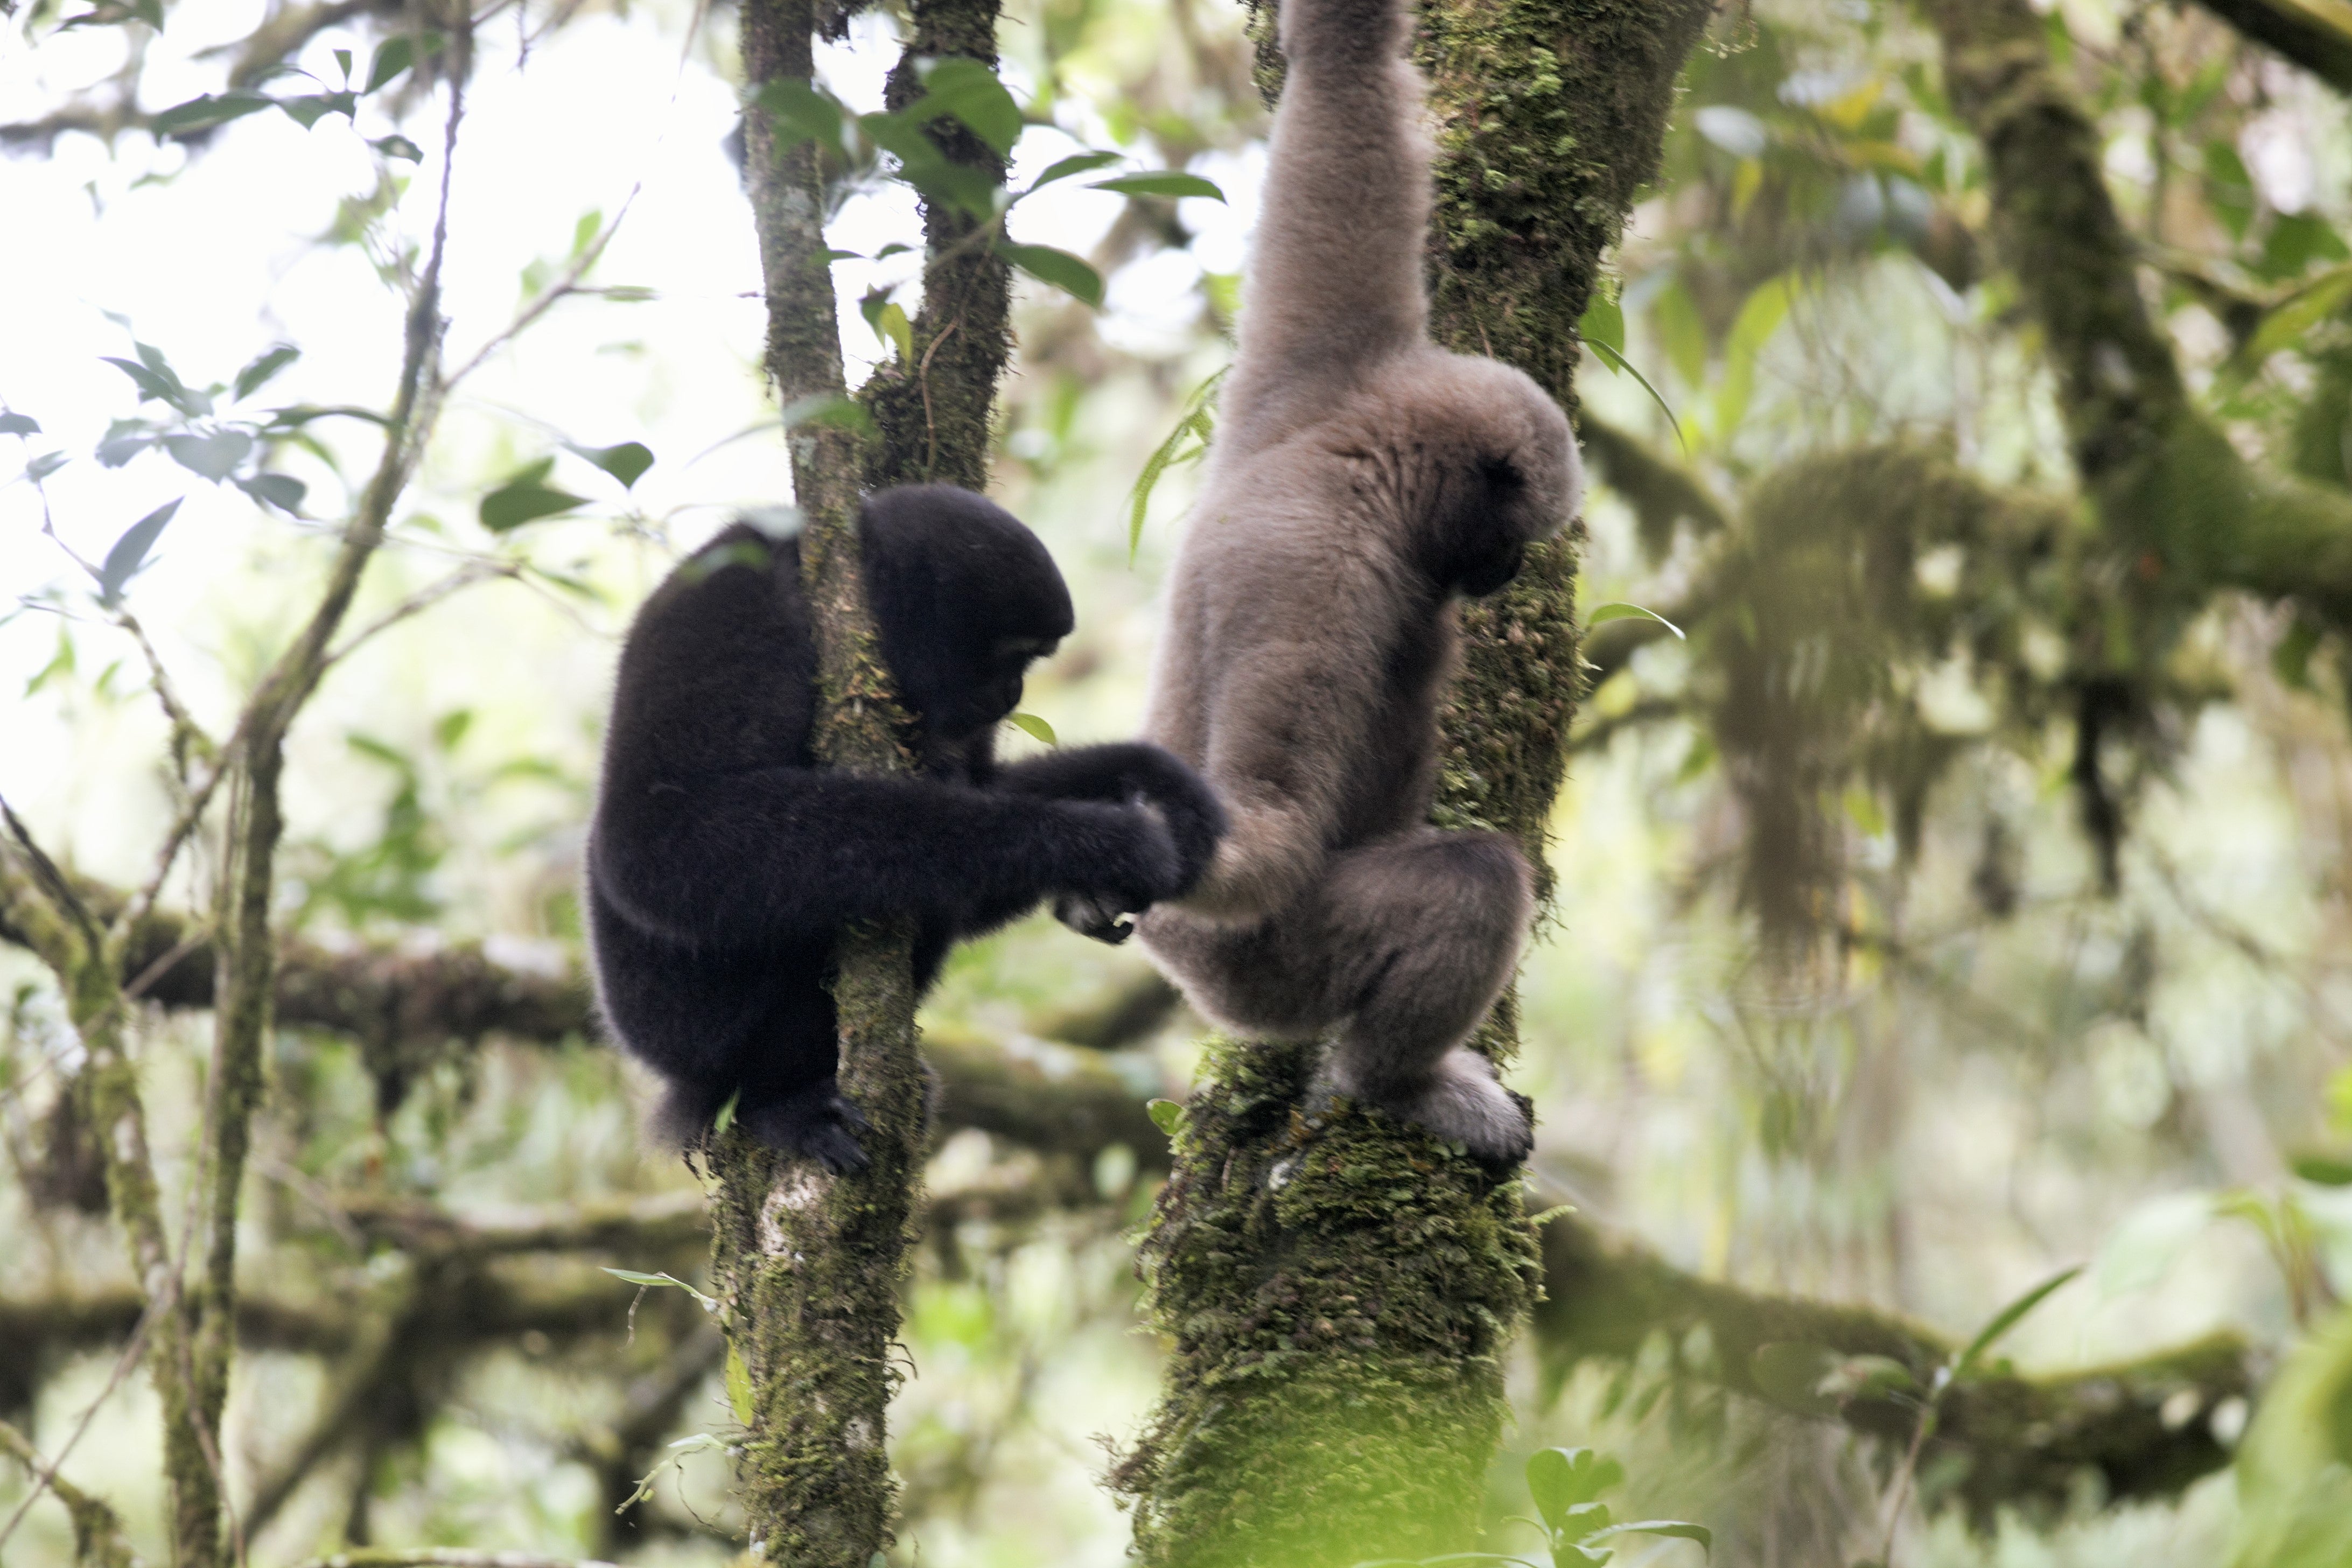 Pair of Eastern hoolock gibbons on tree branch in foret